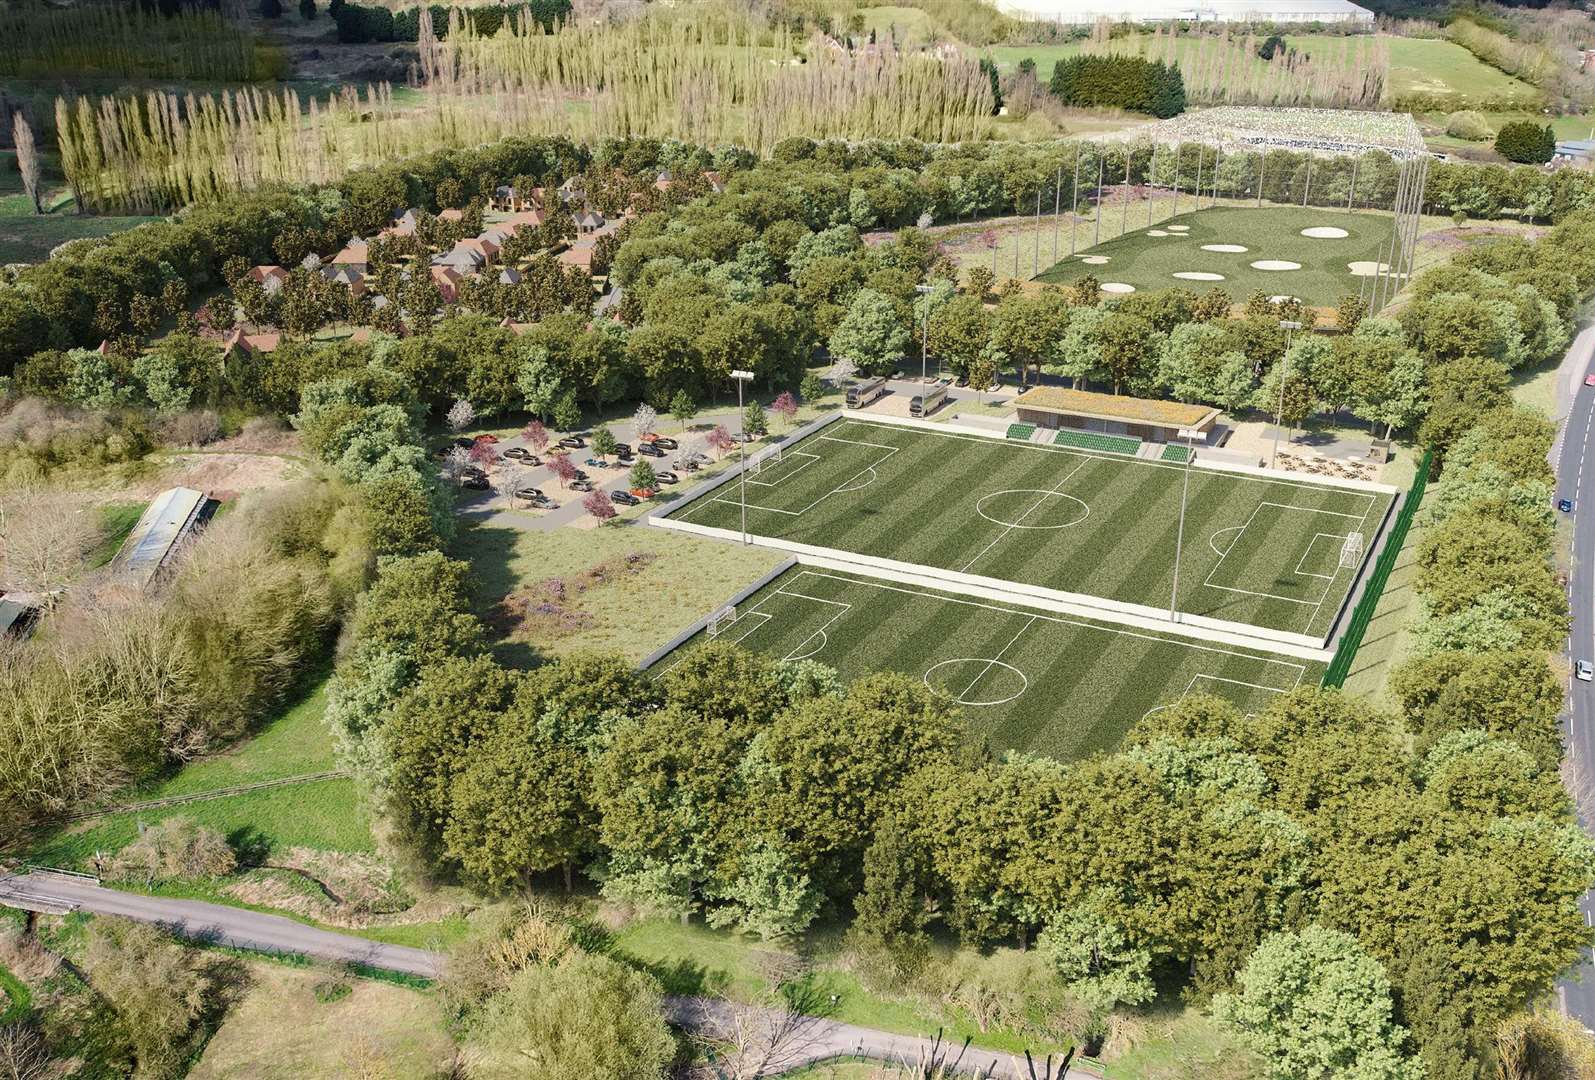 An overview how the new Oast Park sports ground could look. Image: Hollaway Studio